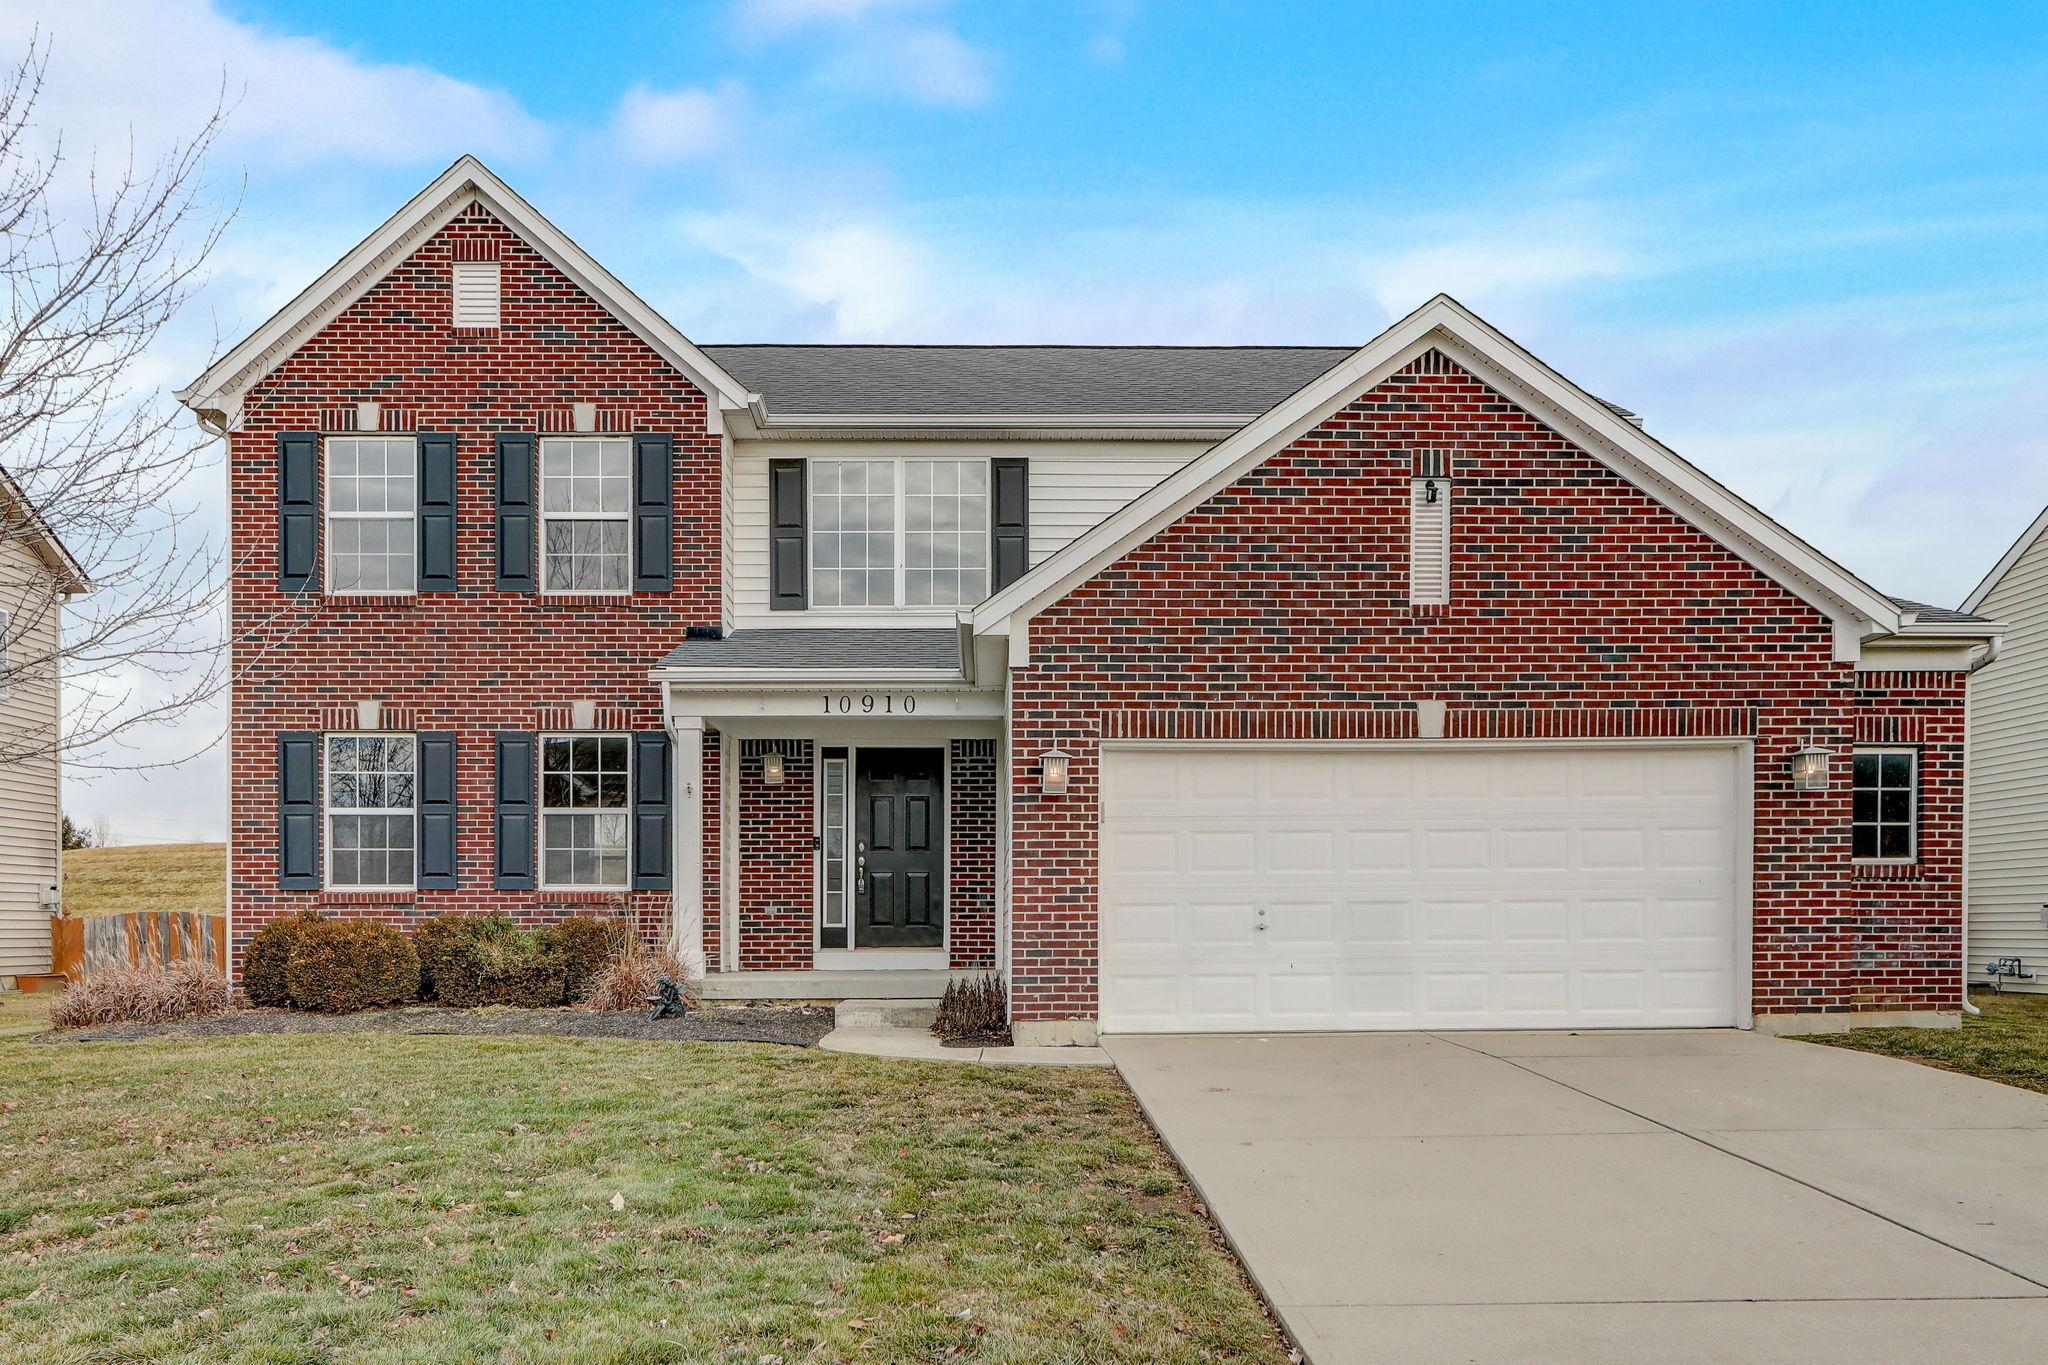 Photo one of 10910 Alamosa Dr Fishers IN 46038 | MLS 21962312